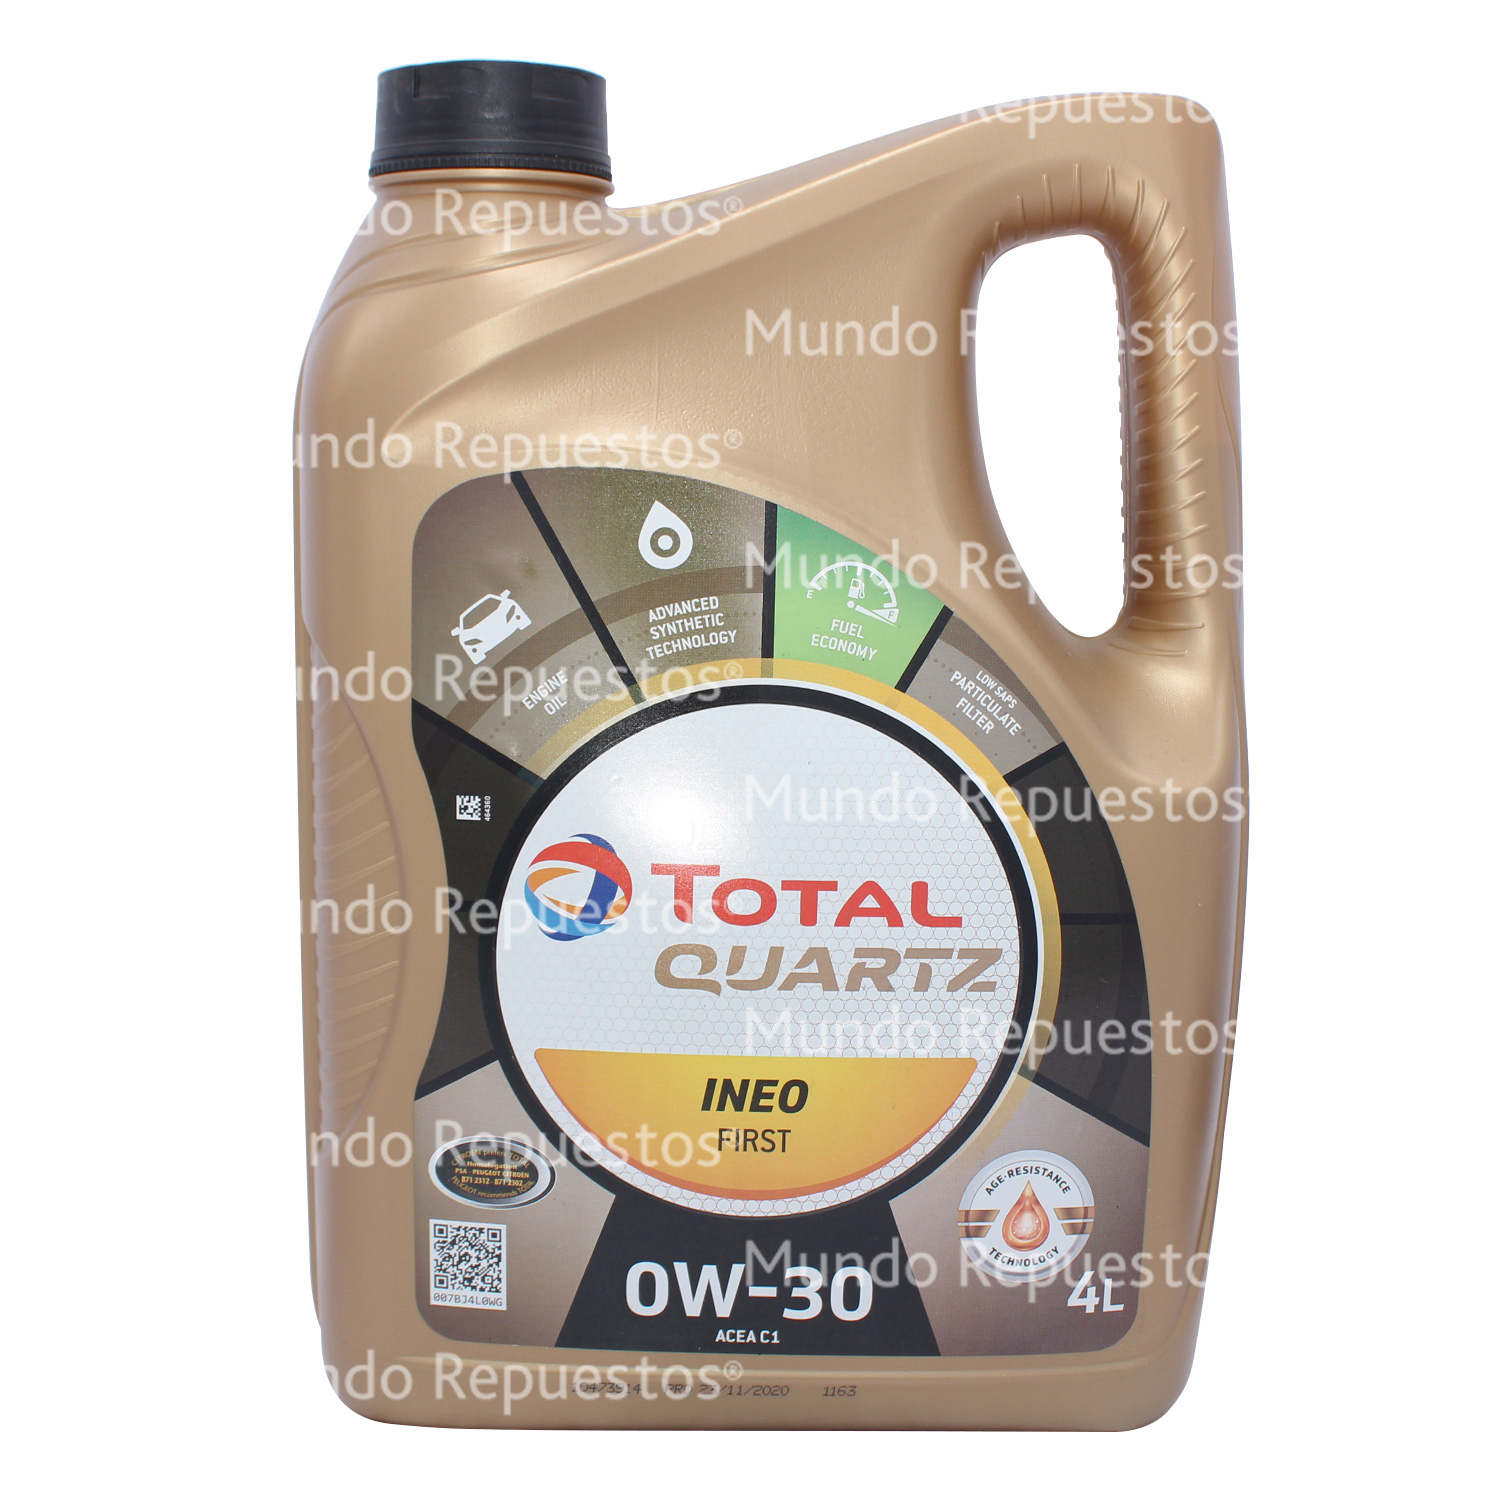 TOTAL QUARTZ INEO FIRST OW30 - General Filters